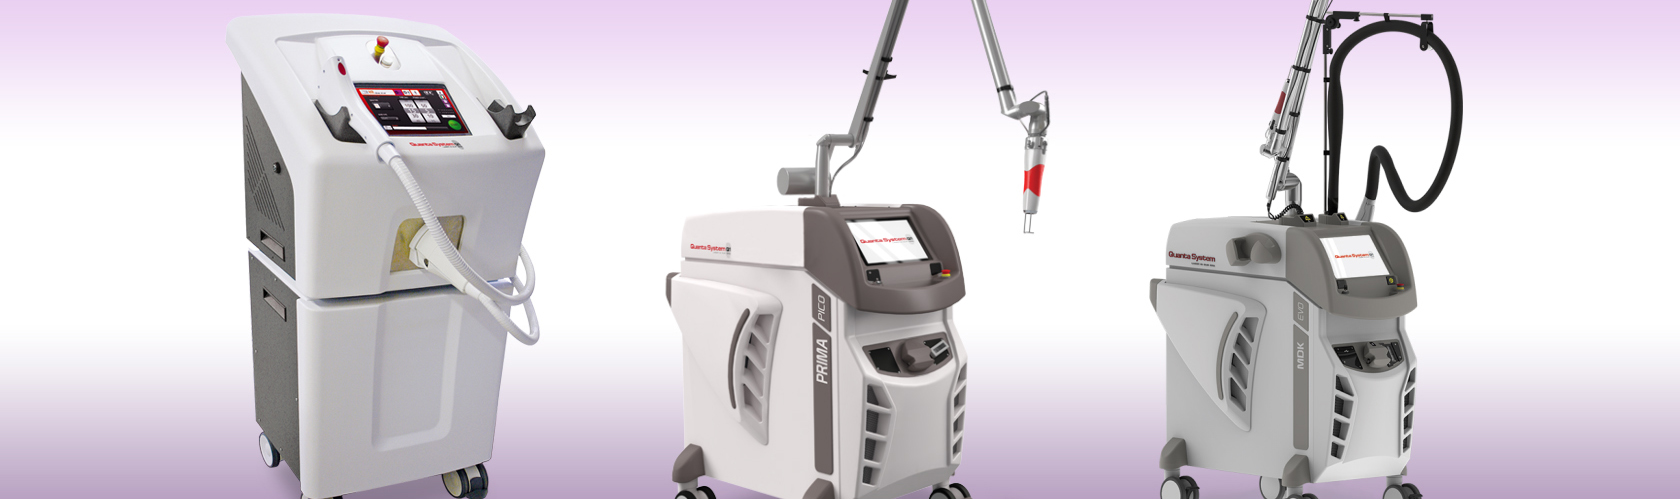 Sell Used Medical Lasers - Sell Your Aesthetic Lasers - Cash Offers